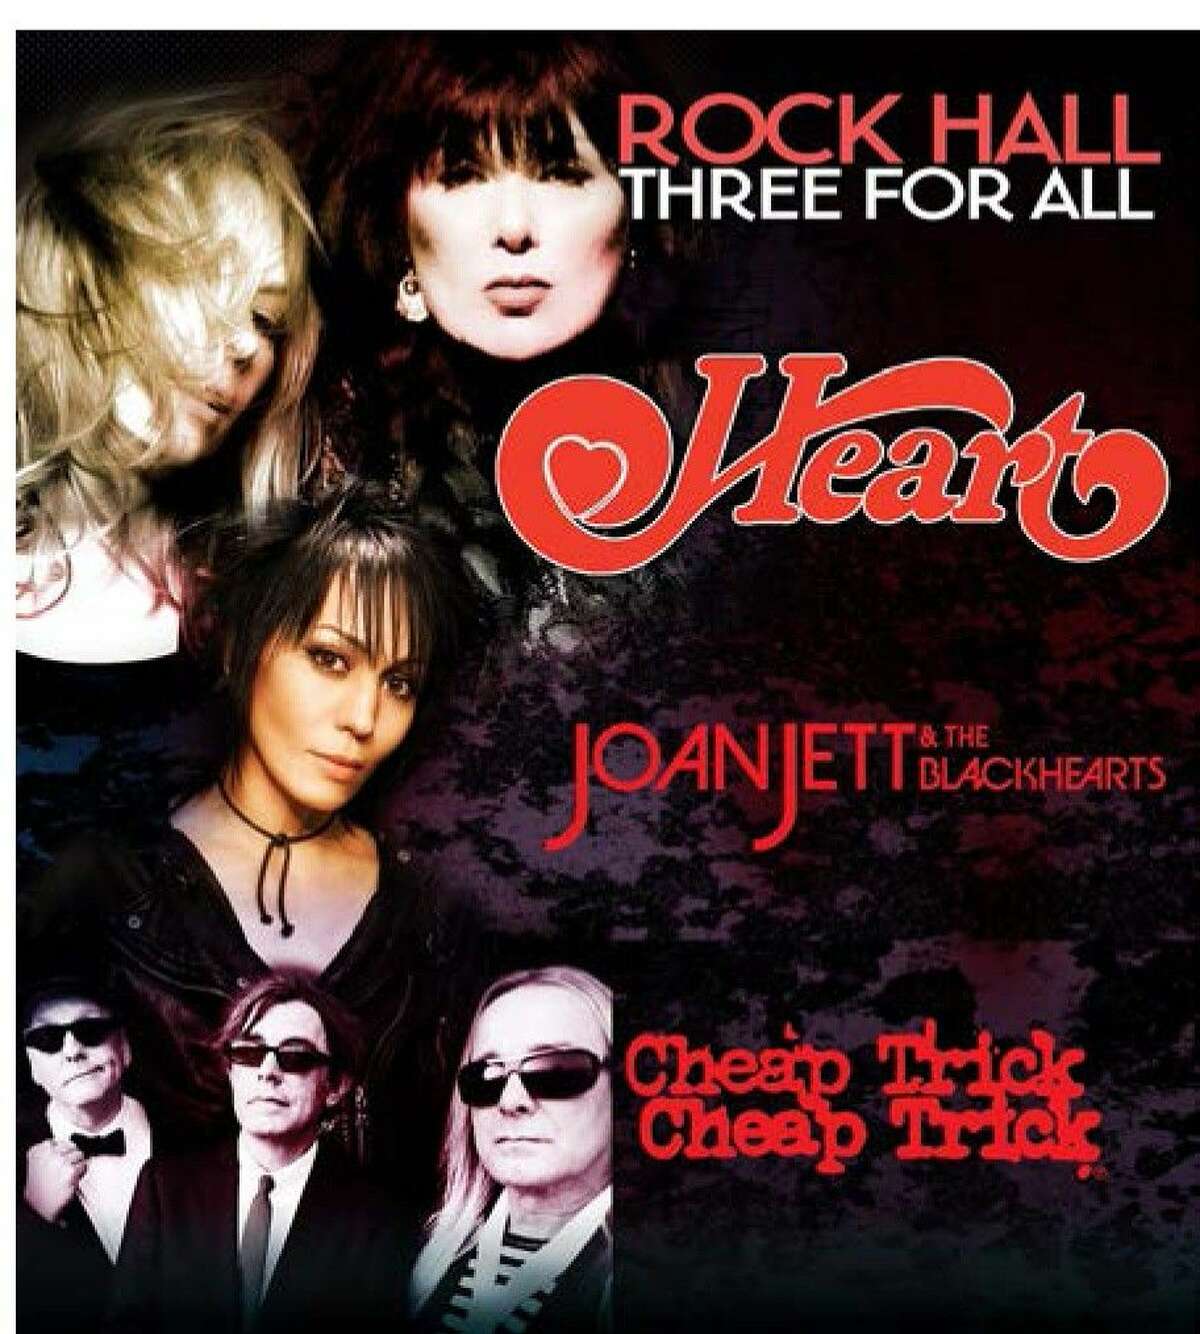 Three of rock music’s most iconic bands will hit the road together this summer on The Rock Hall Three For All Featuring Heart, Joan Jett & The Blackhearts and Cheap Trick. The tour will hit Cynthia Woods Mitchell Pavilion in The Woodlands on Aug. 19.